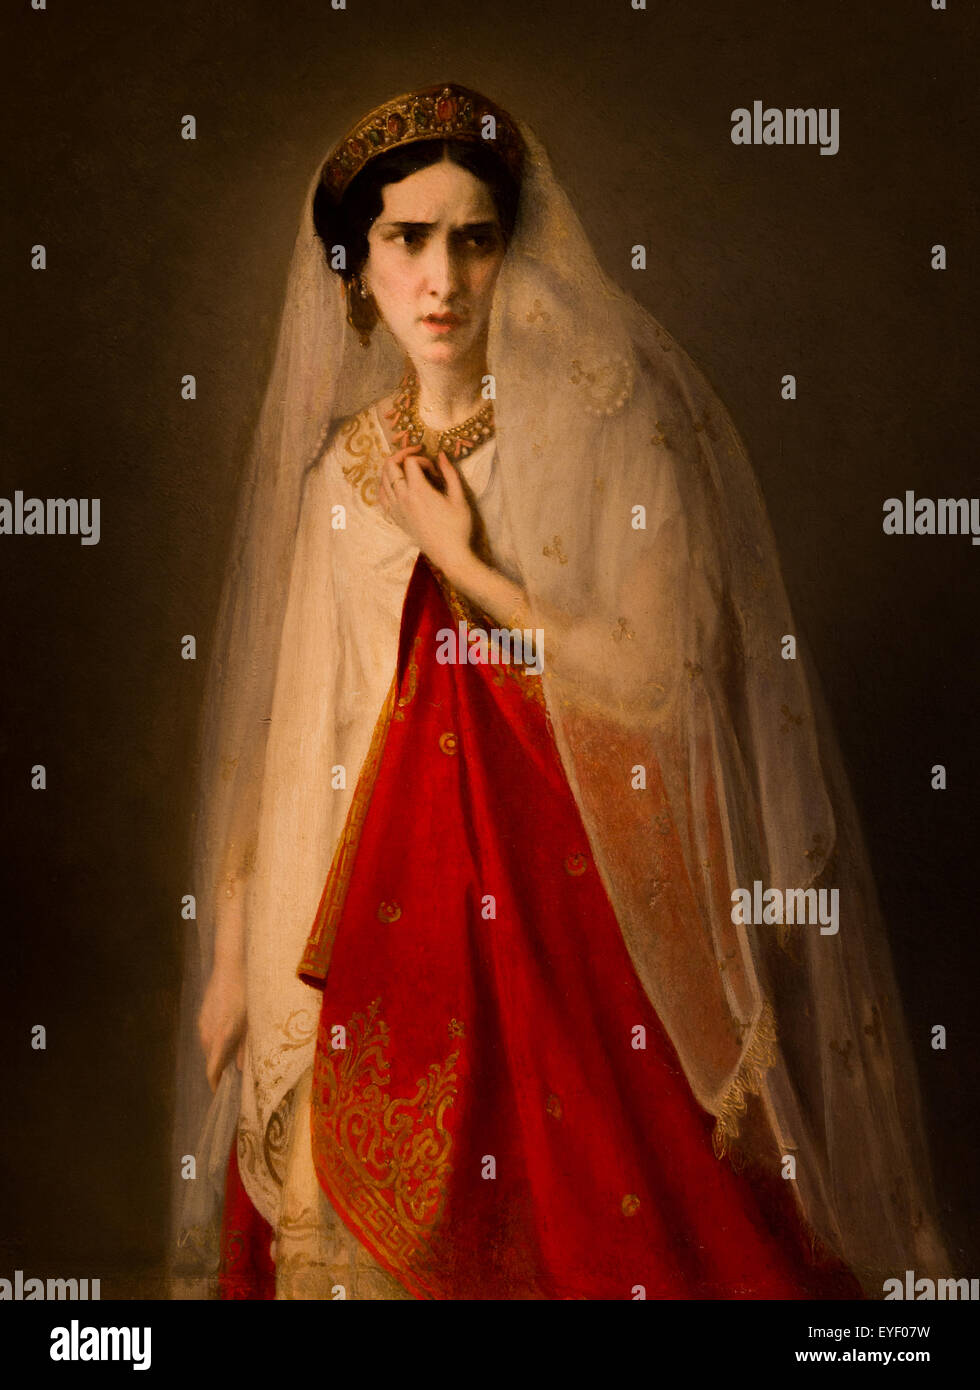 Rachel (1821-1858) in the role of Phedre 17/10/2013 - 19th century Collection Stock Photo